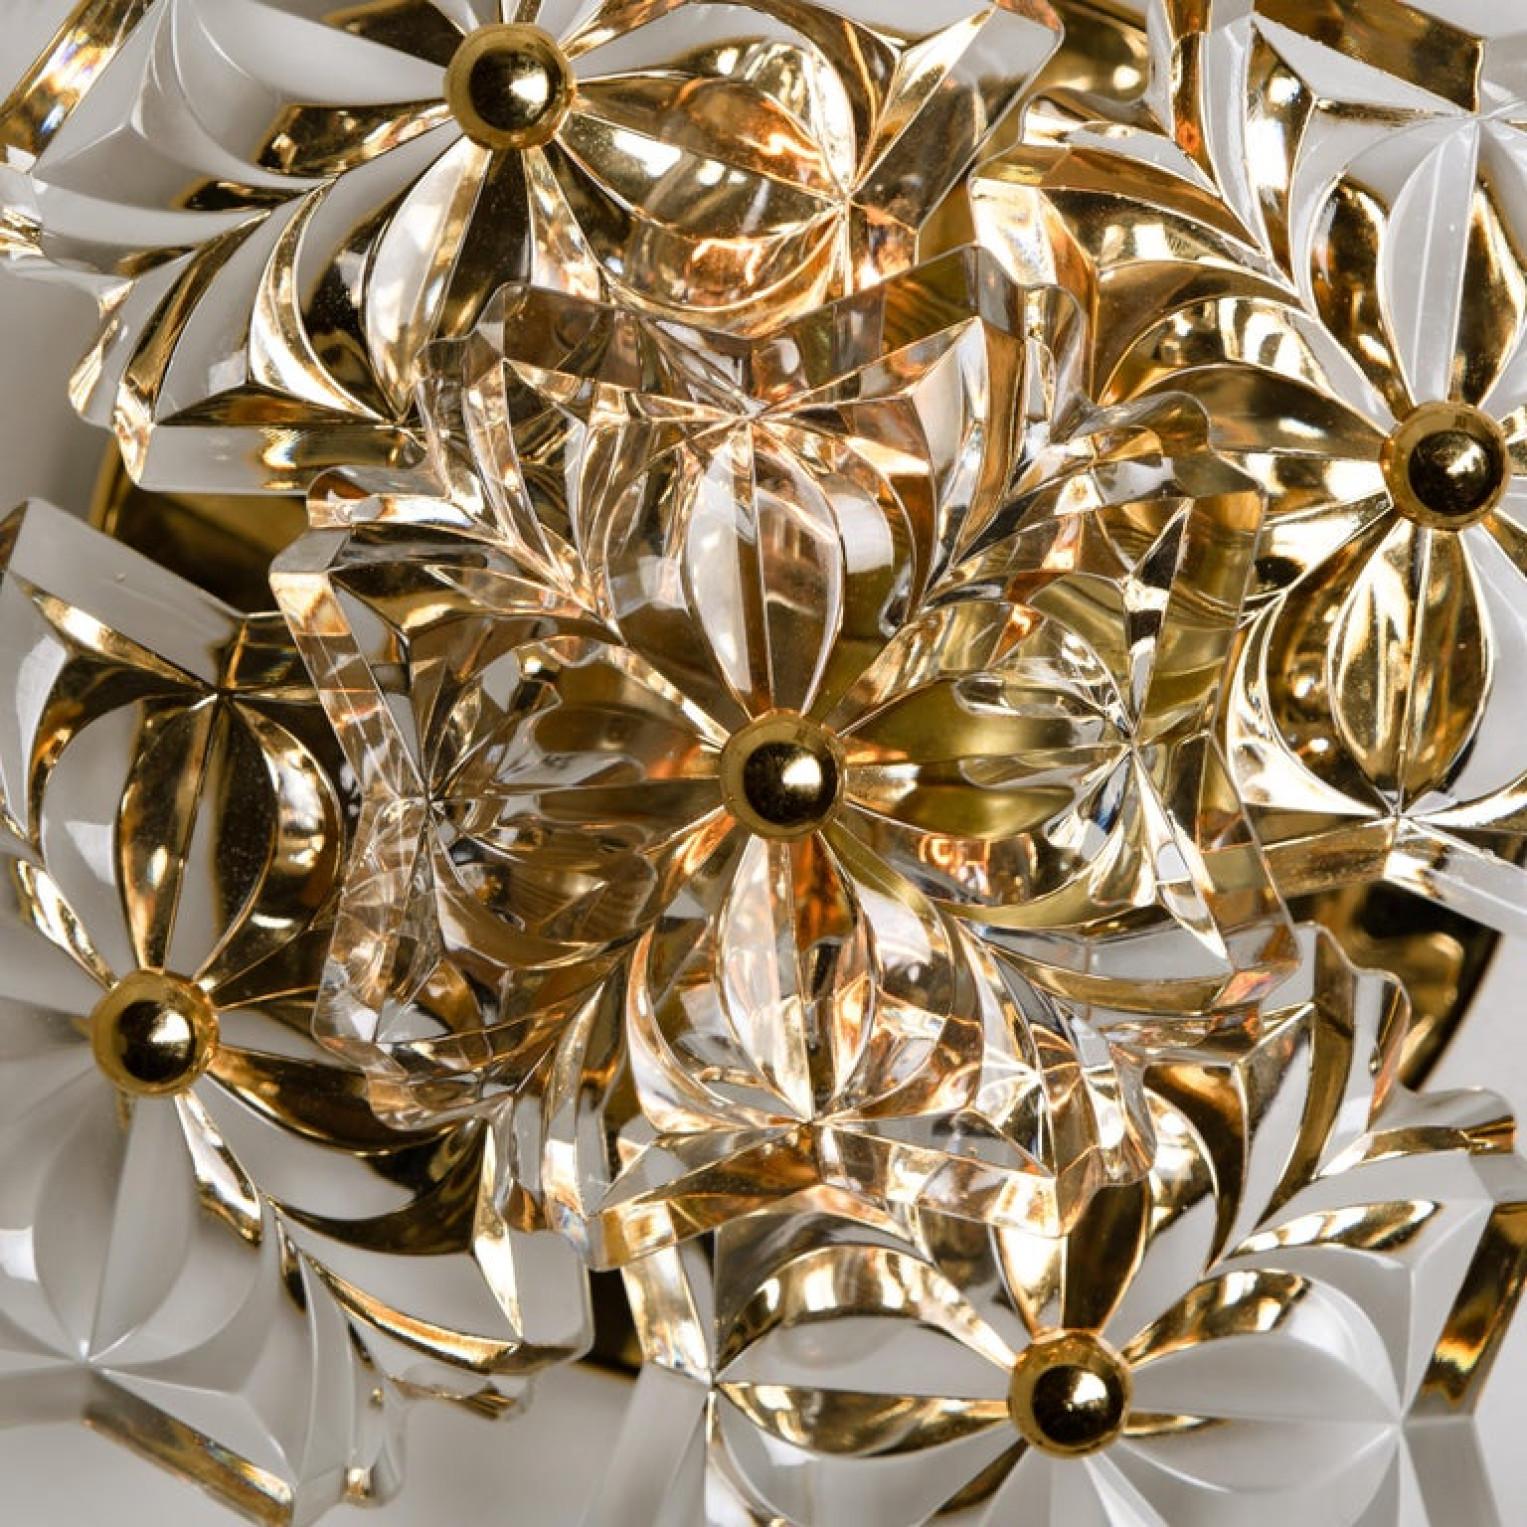 Pair of Midcentury Brass Floral Wall Lights by Hillebrand, 1970s For Sale 5